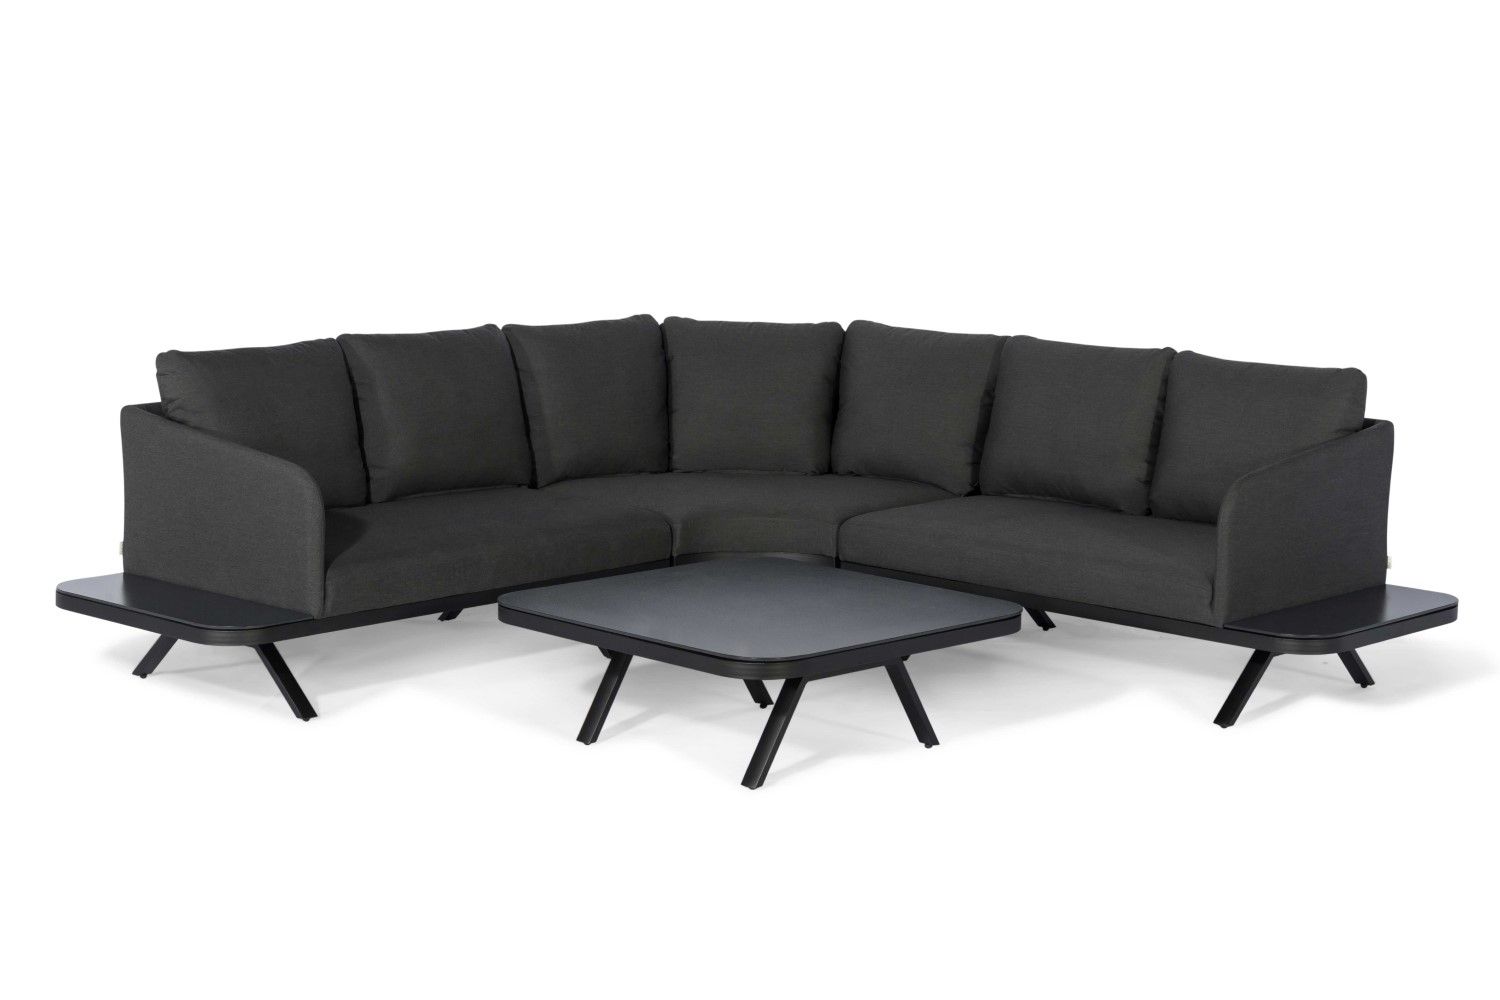 Maze Rattan – Cove Corner Sofa Group – Charcoal – Ls Living With Regard To Katie Charcoal Sofas (View 8 of 15)